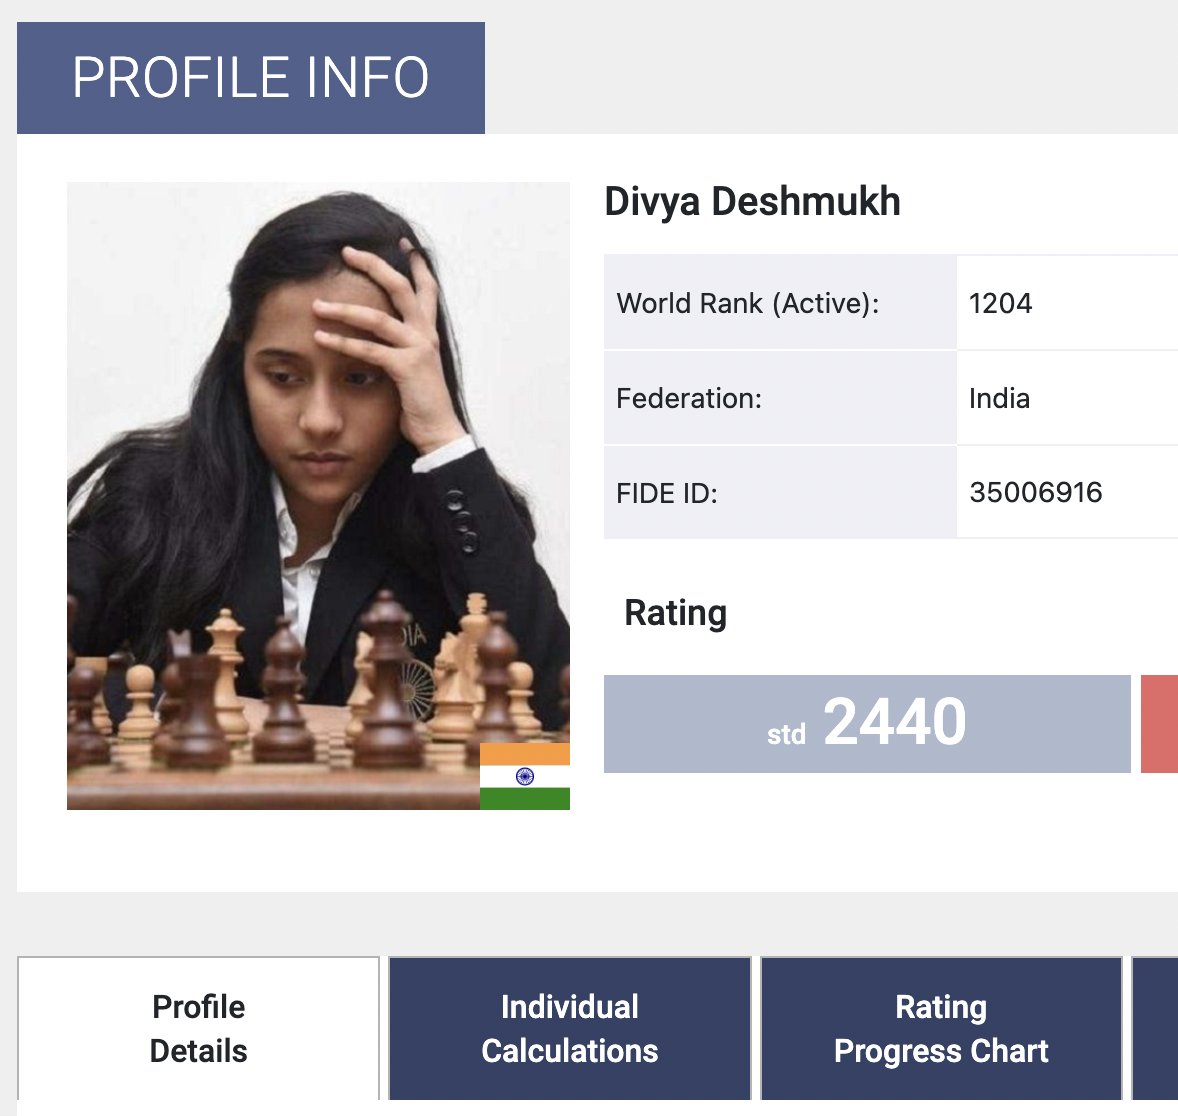 Divya Deshmukh also reached a new peak rating!! 🥳
It's her first new peak rating in five years! 🤯

ratings.fide.com/profile/350069…
#chess #womeninchess